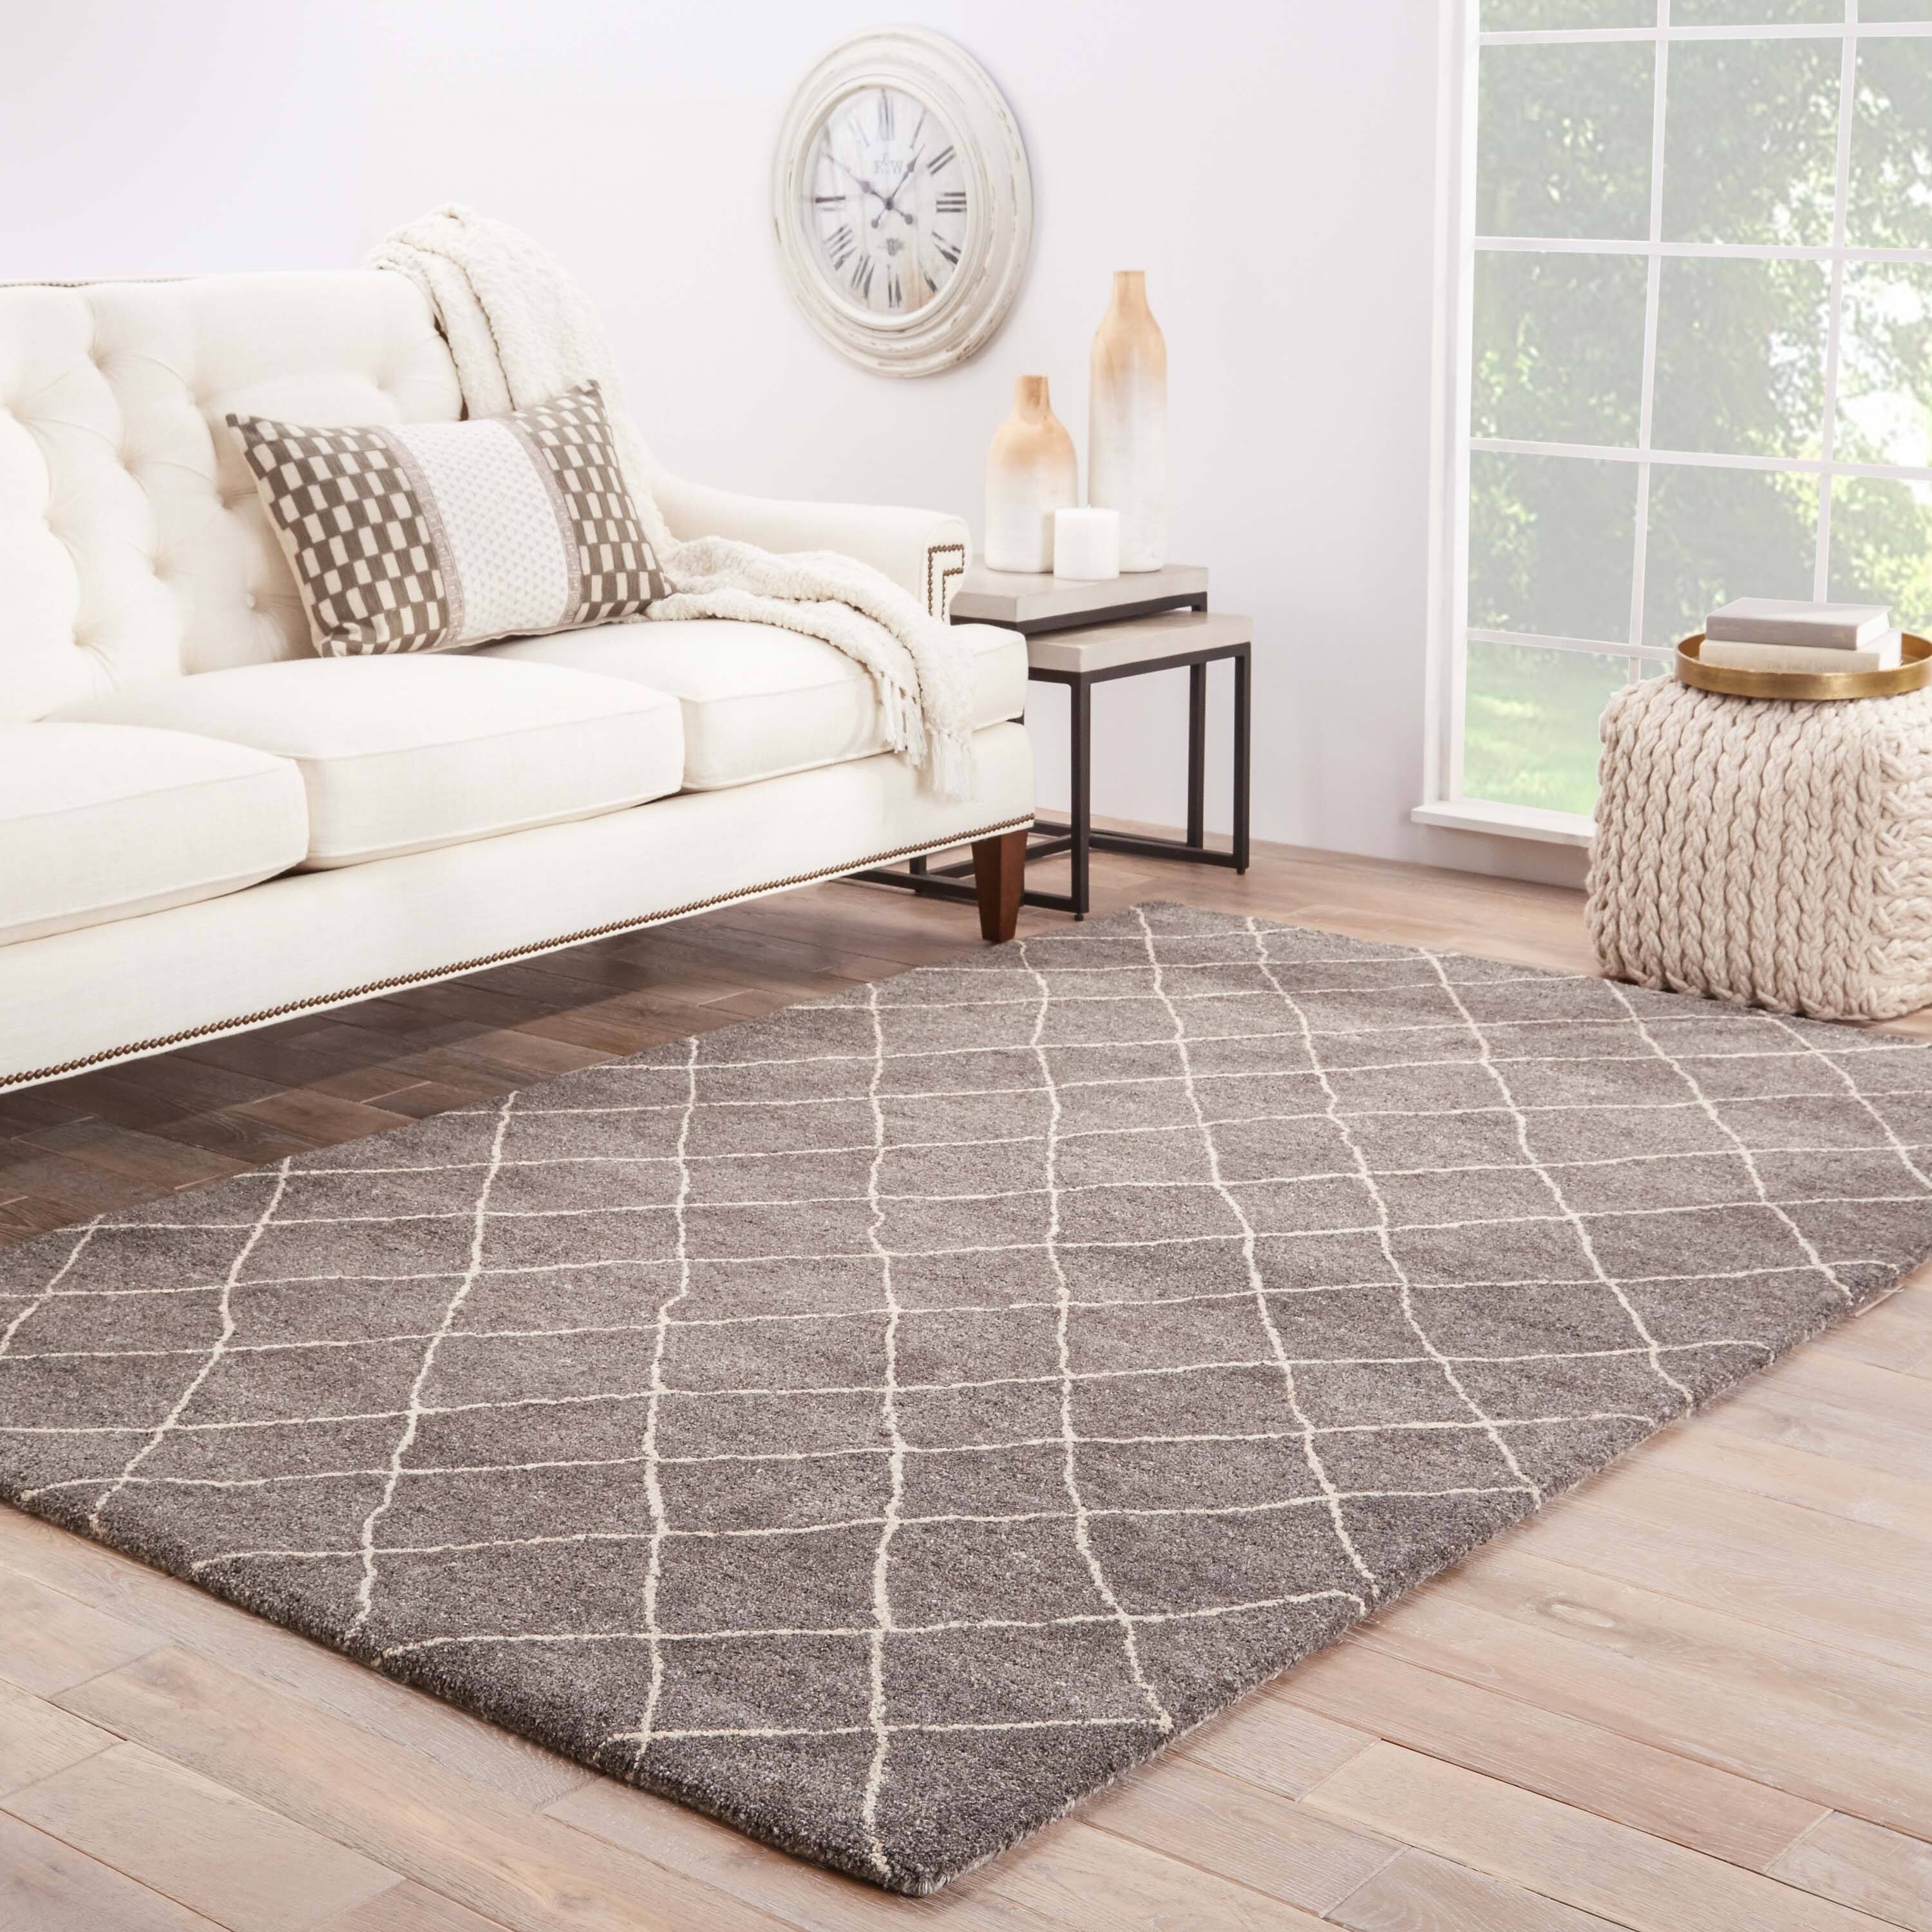 Buy Area Rugs Online at Overstock | Our Best Rugs Deals